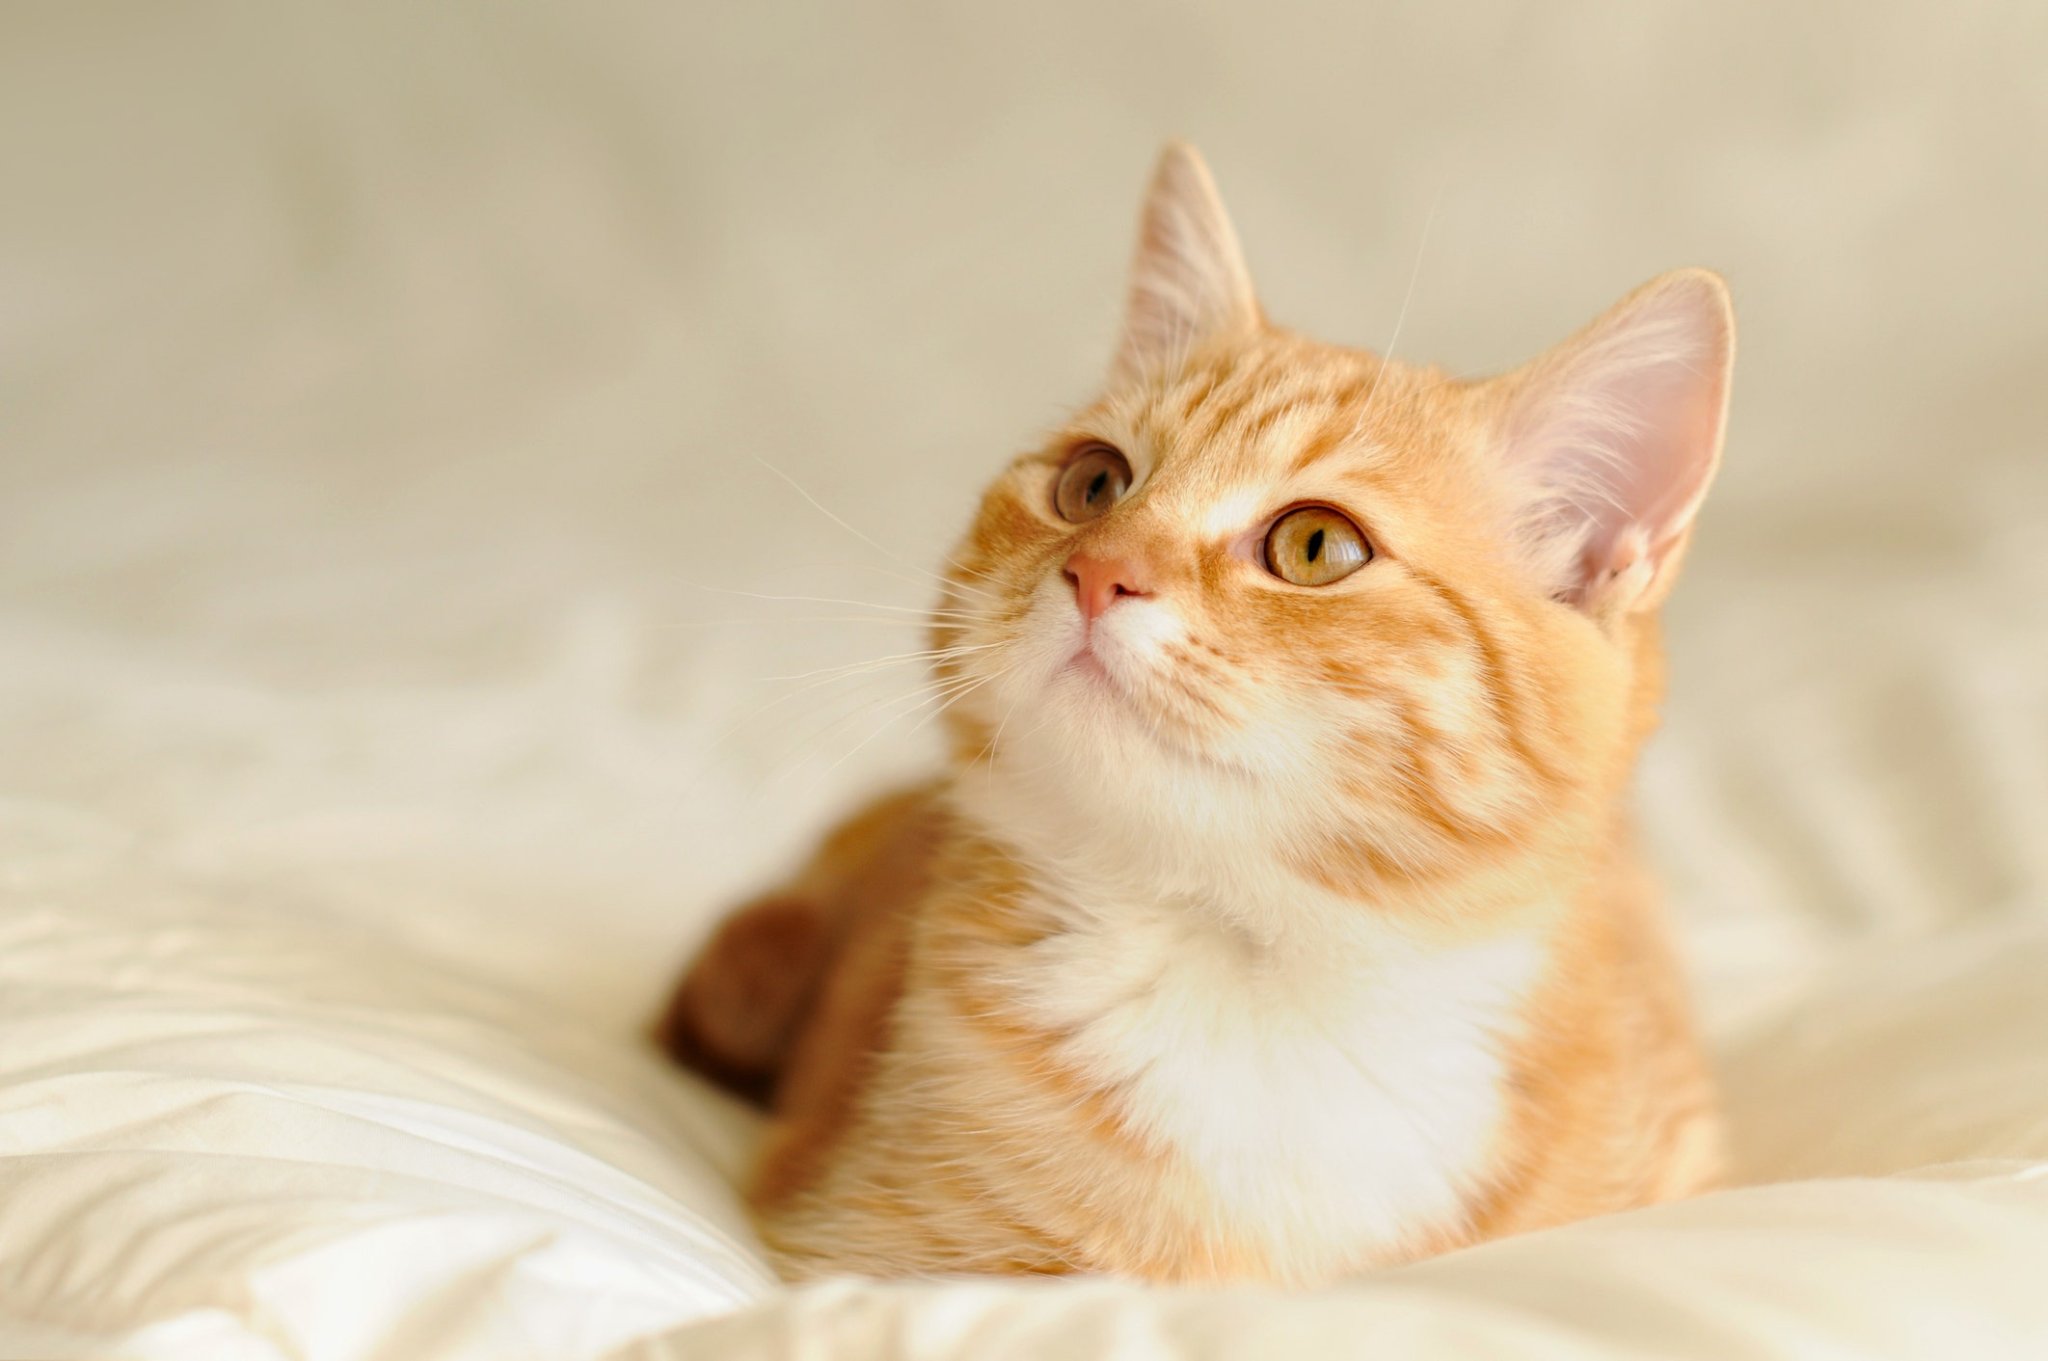 Cats recover from coronavirus faster than humans, researchers say